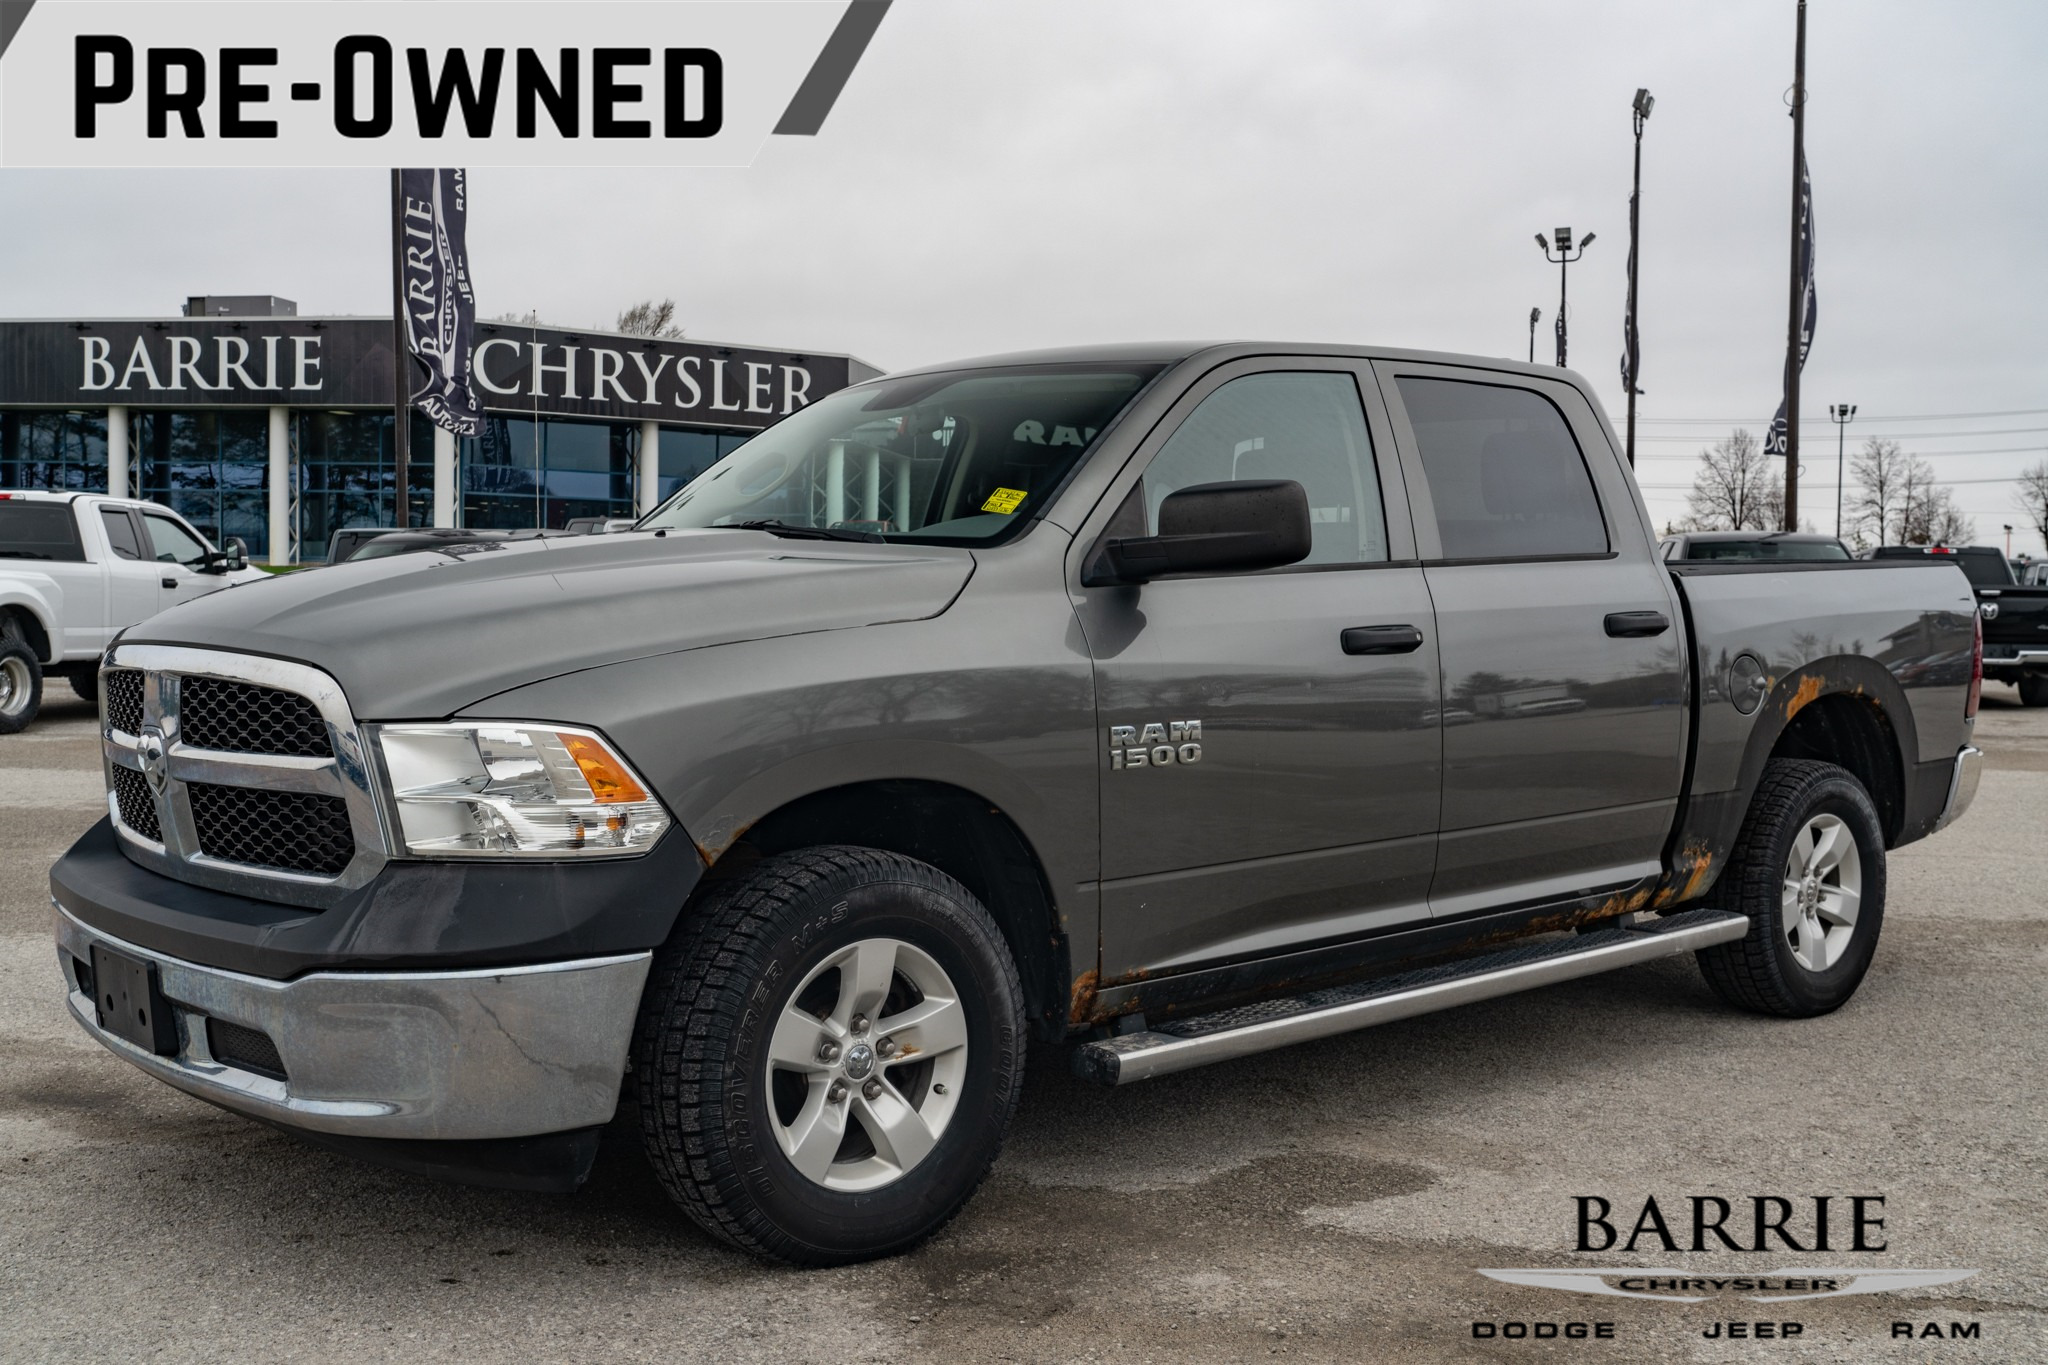 2013 Ram 1500 SOLD AS IS